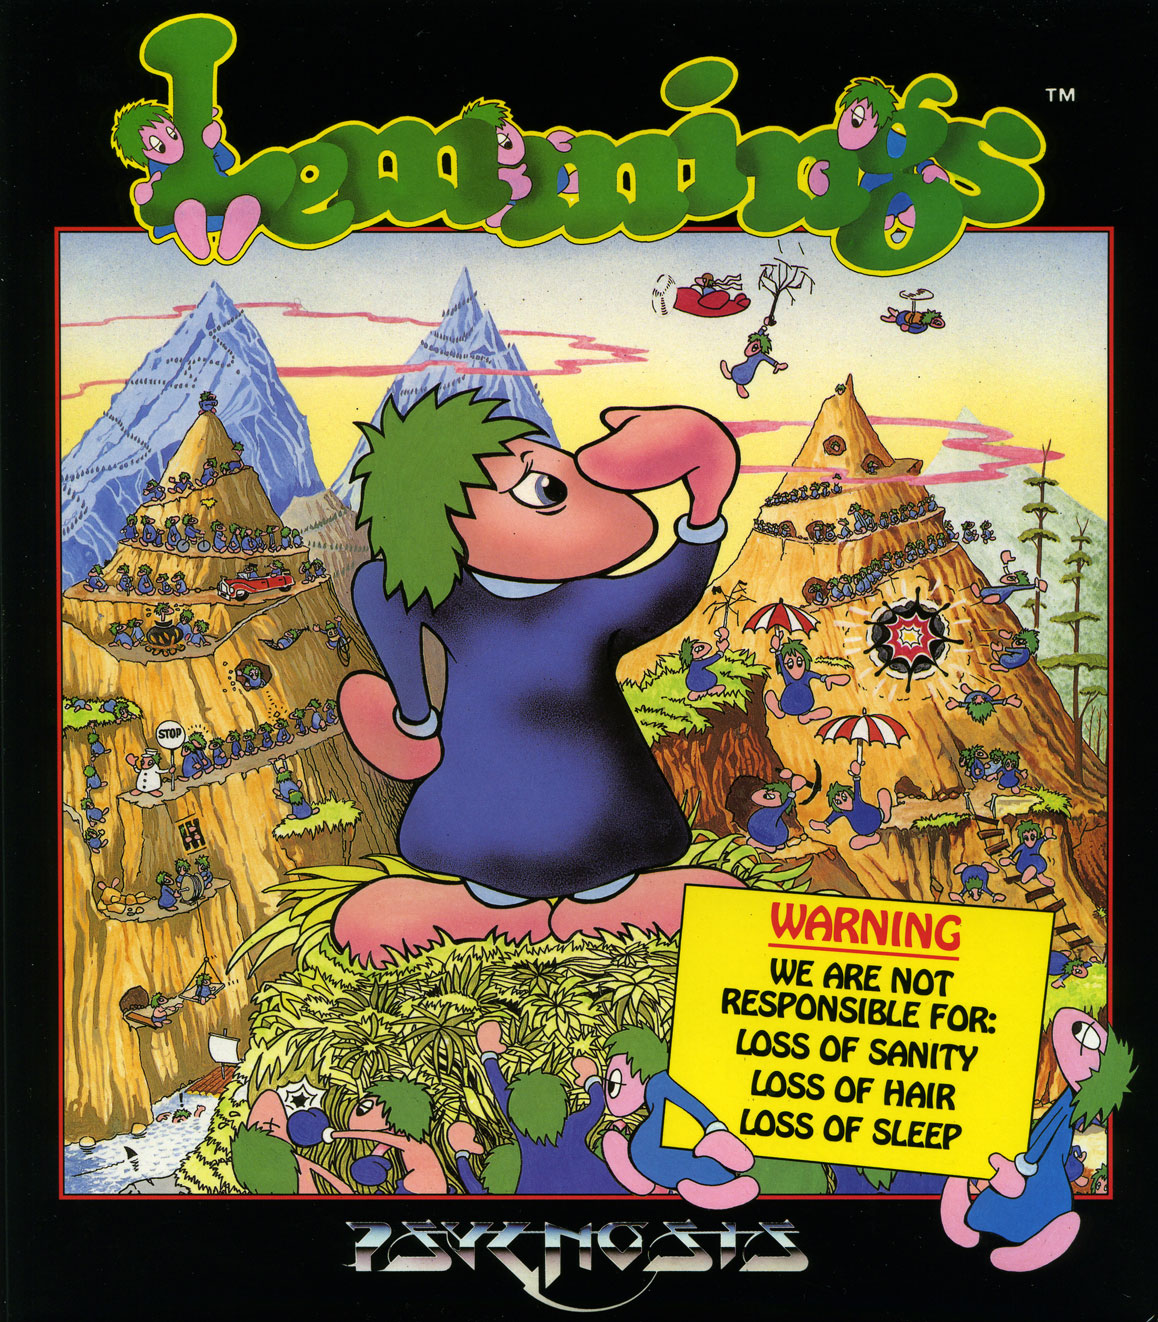 lemmings-front-cover-with-warning.jpg